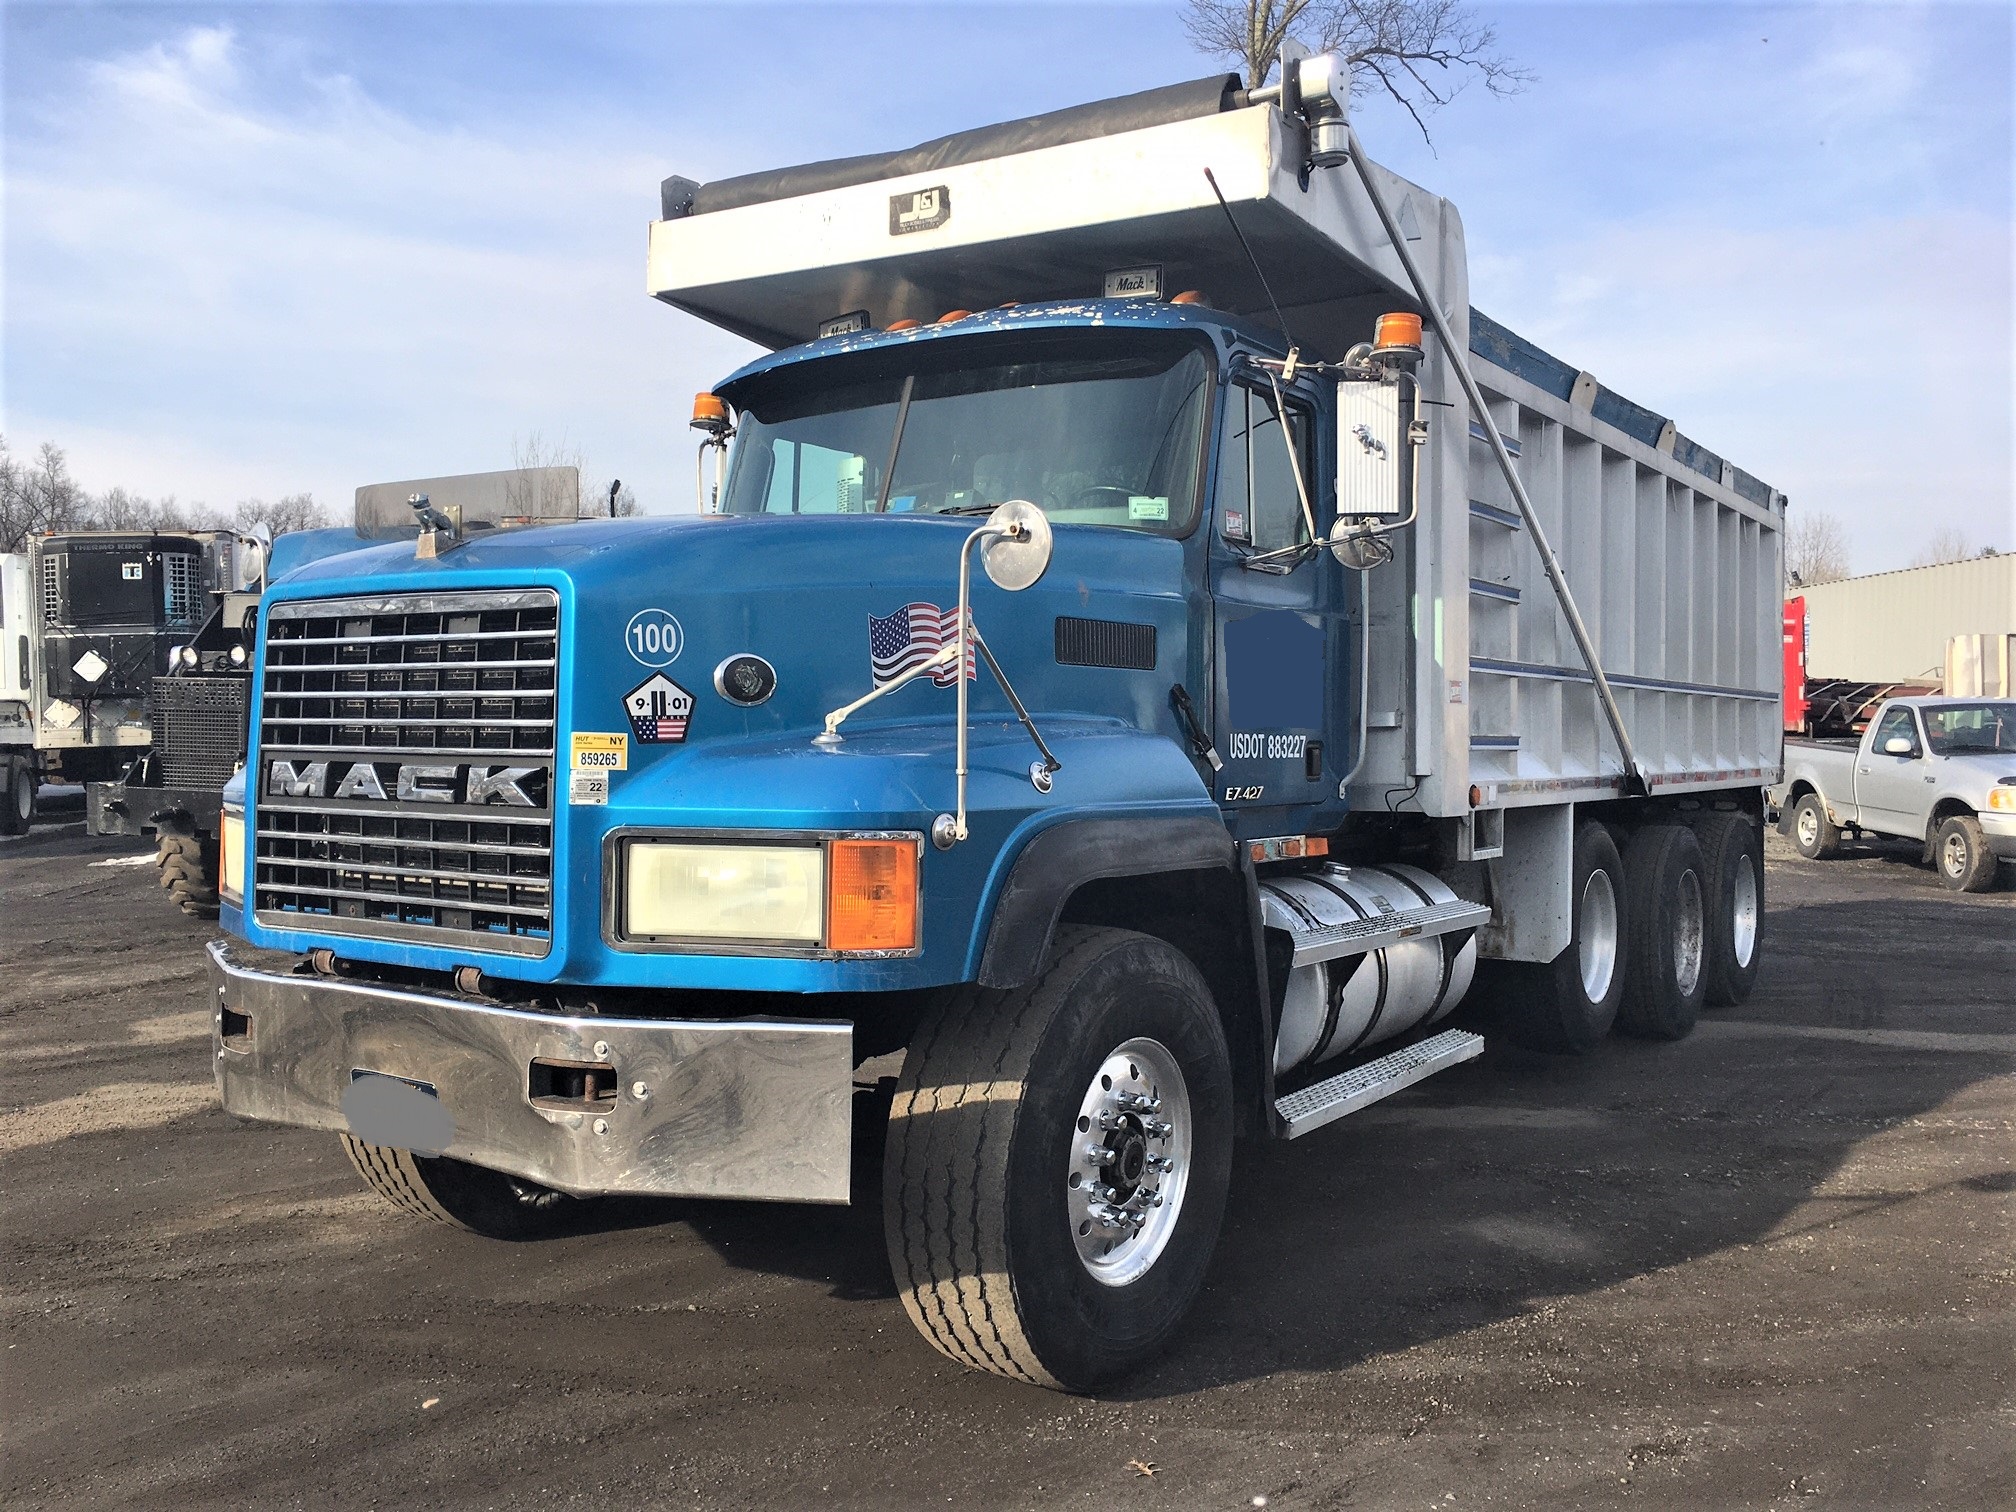 Mack Tri-Axle Dump Truck. 1998 CL-713 model truck with an E7-427 V Mac Engine driven 440'000 miles. 8 speed low/low Eaton Fuller transmission. Straight tri-axle "non steerable" 46'000 lb. newer rears, yolks and U joints. New radiator. Air ride suspension. Comfortable driving and riding dump truck. J&J 24 yard aluminum side steel floor dump box measuring 19 1/2 feet long by 5 feet 8 inches high. Great truck for hauling coal, mulch, blacktop, dirt, rock or gravel material.